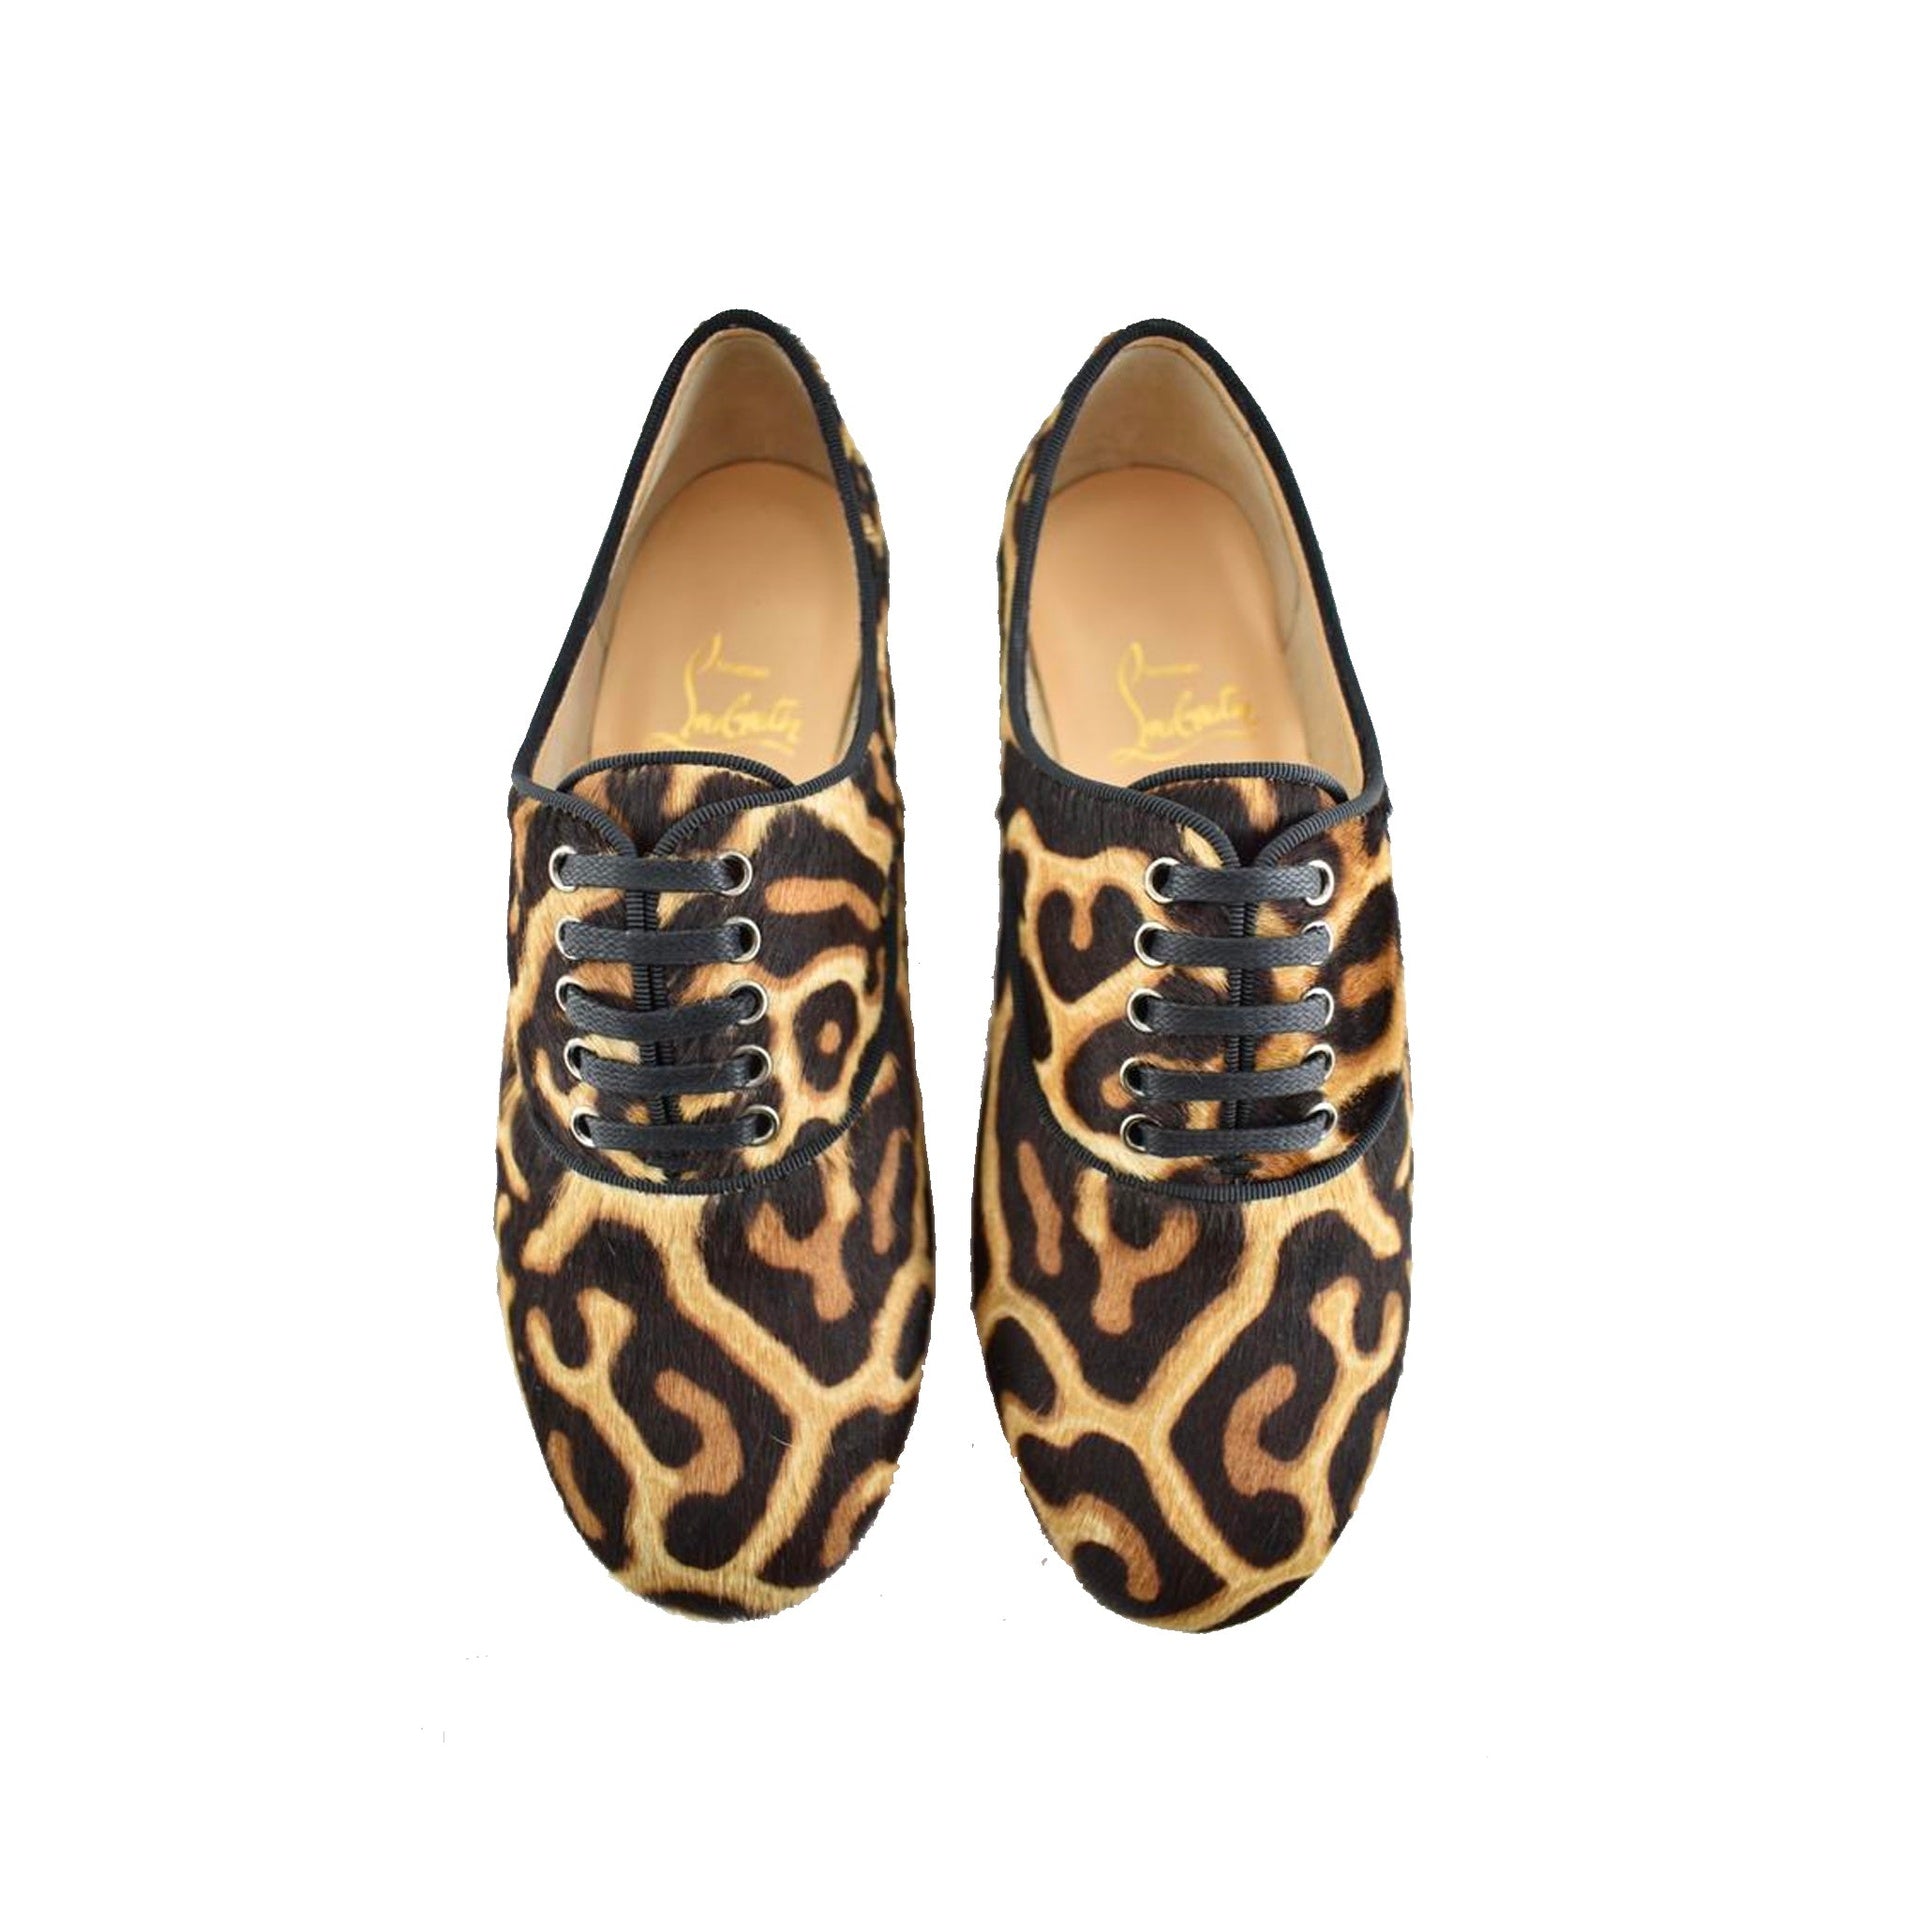 CHRISTIAN-LOUBOUTIN-OUTLET-SALE-Christian-Louboutin-New-Fred-Leopard-Flats-Flache-Schuhe-BROWN-36-ARCHIVE-COLLECTION-4.jpg